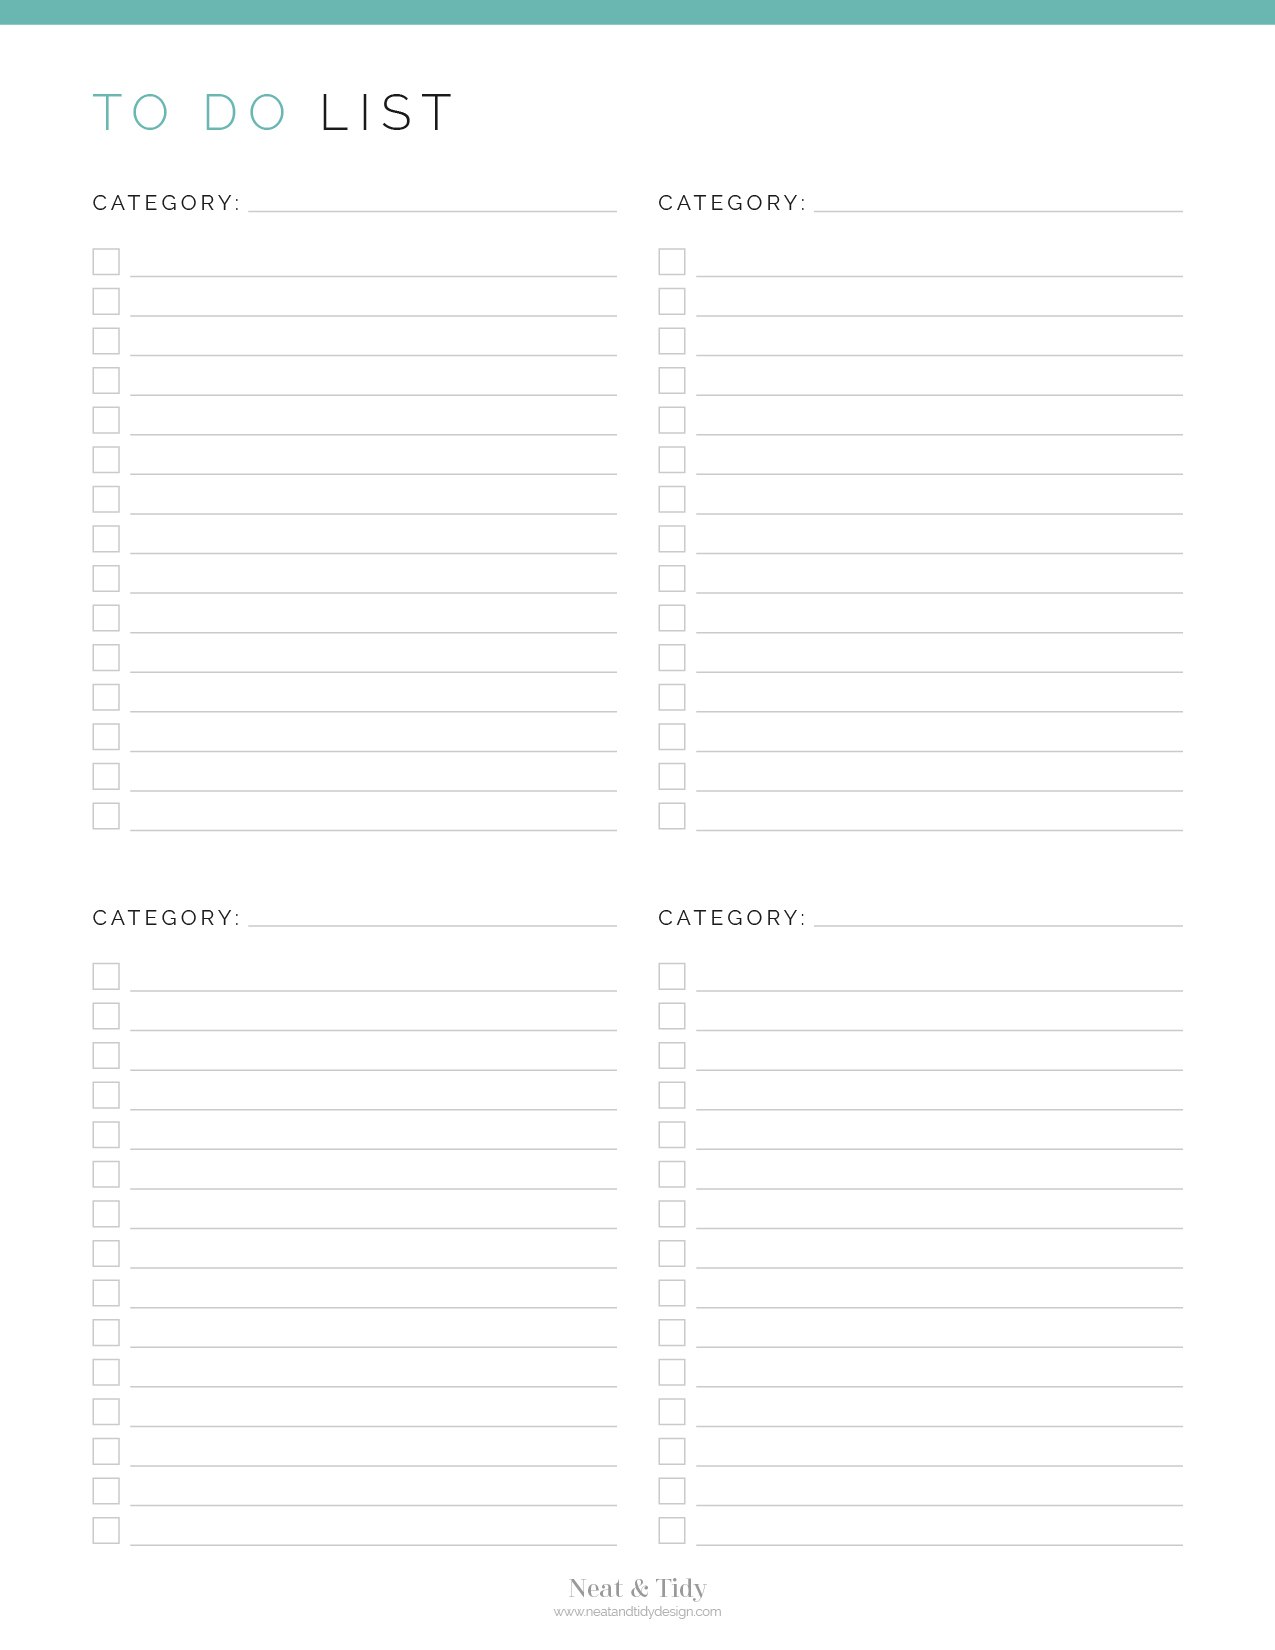 to-do-list-with-categories-neat-and-tidy-design